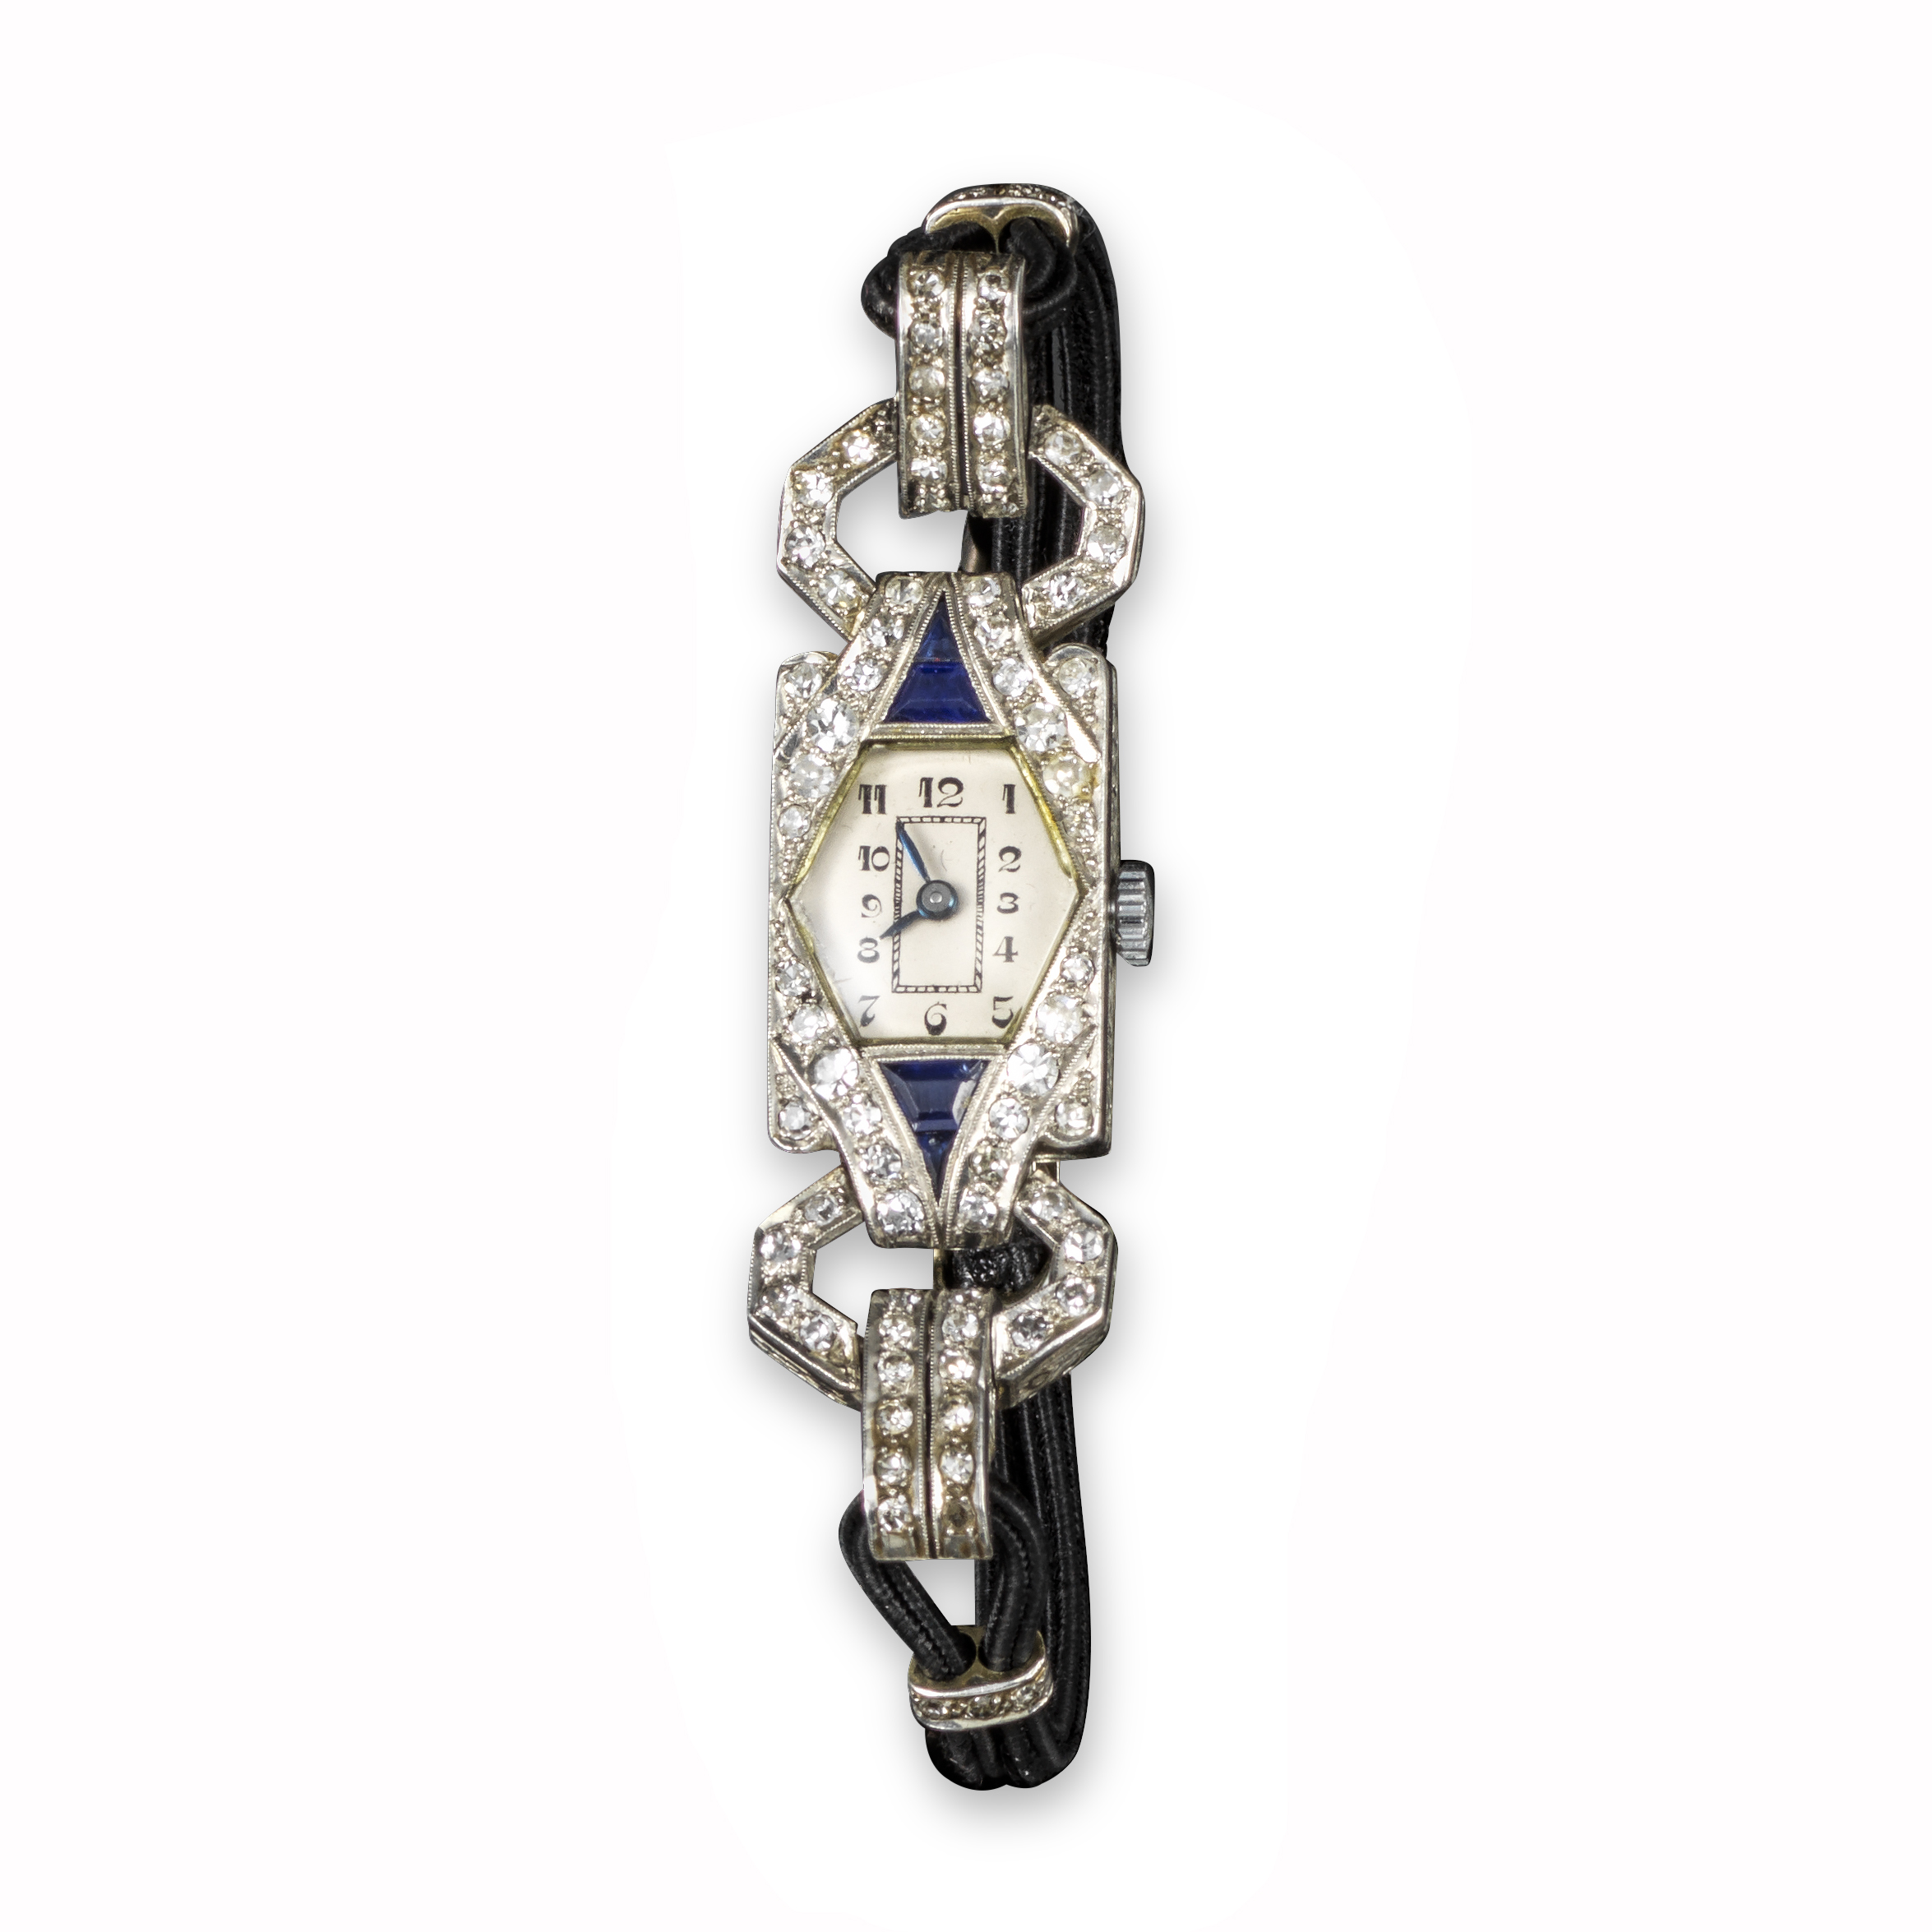 A lady's Art Deco cocktail wristwatch, the hexagonal dial with black Arabic numerals with diamond